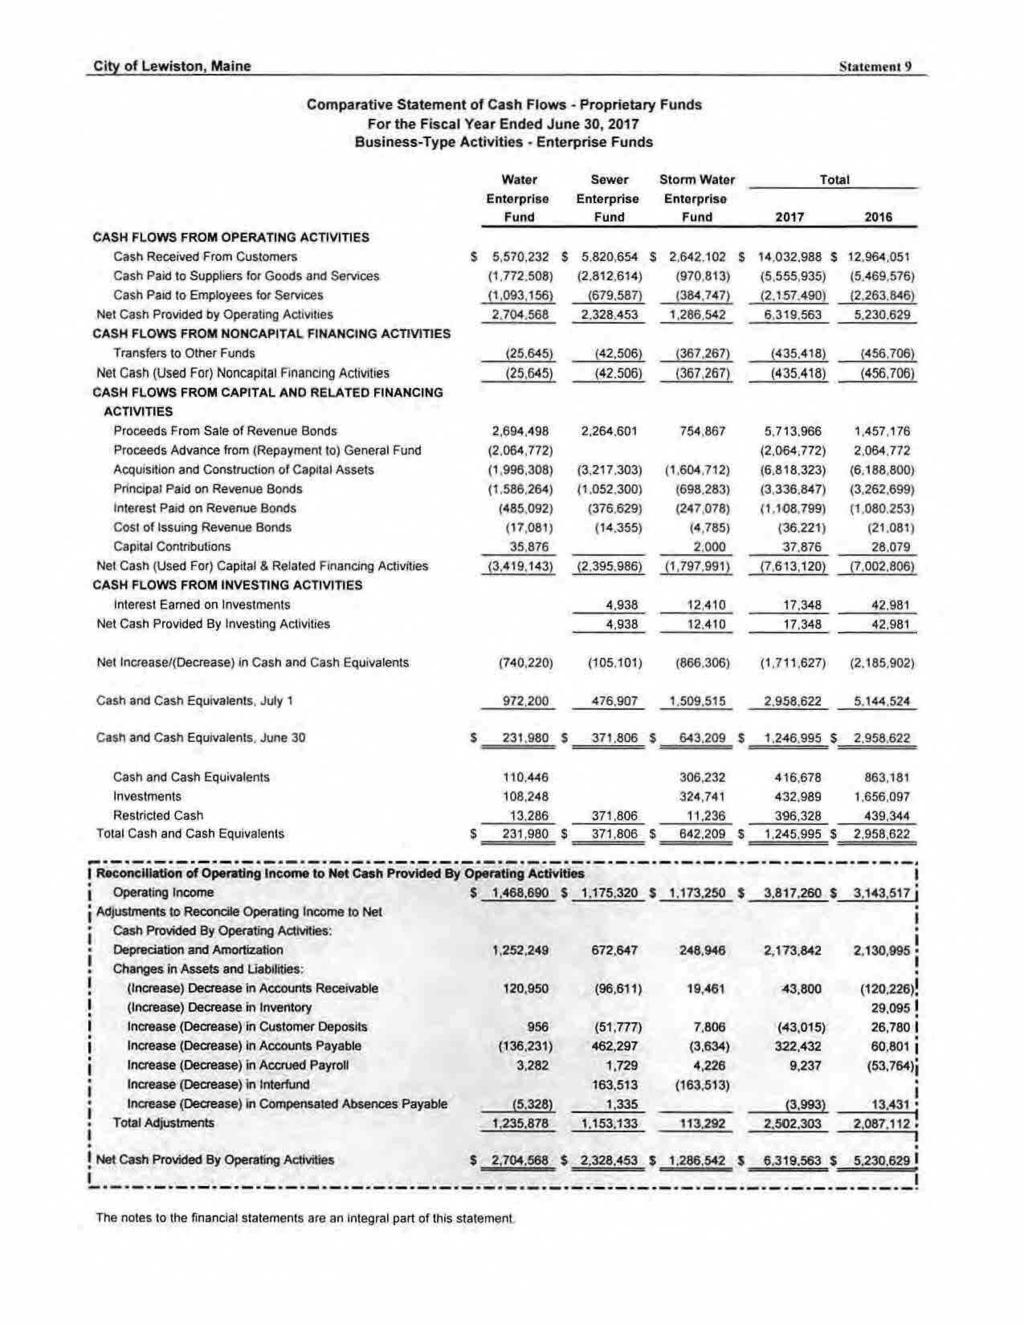 City of Lewiston, Maine St.atemenJ 9 Comparative Statement of Cash Flows - Proprietary Funds For the Fiscal Vear Ended June 30, 2017 Business-Type Activities - Enterprise Funds CA.